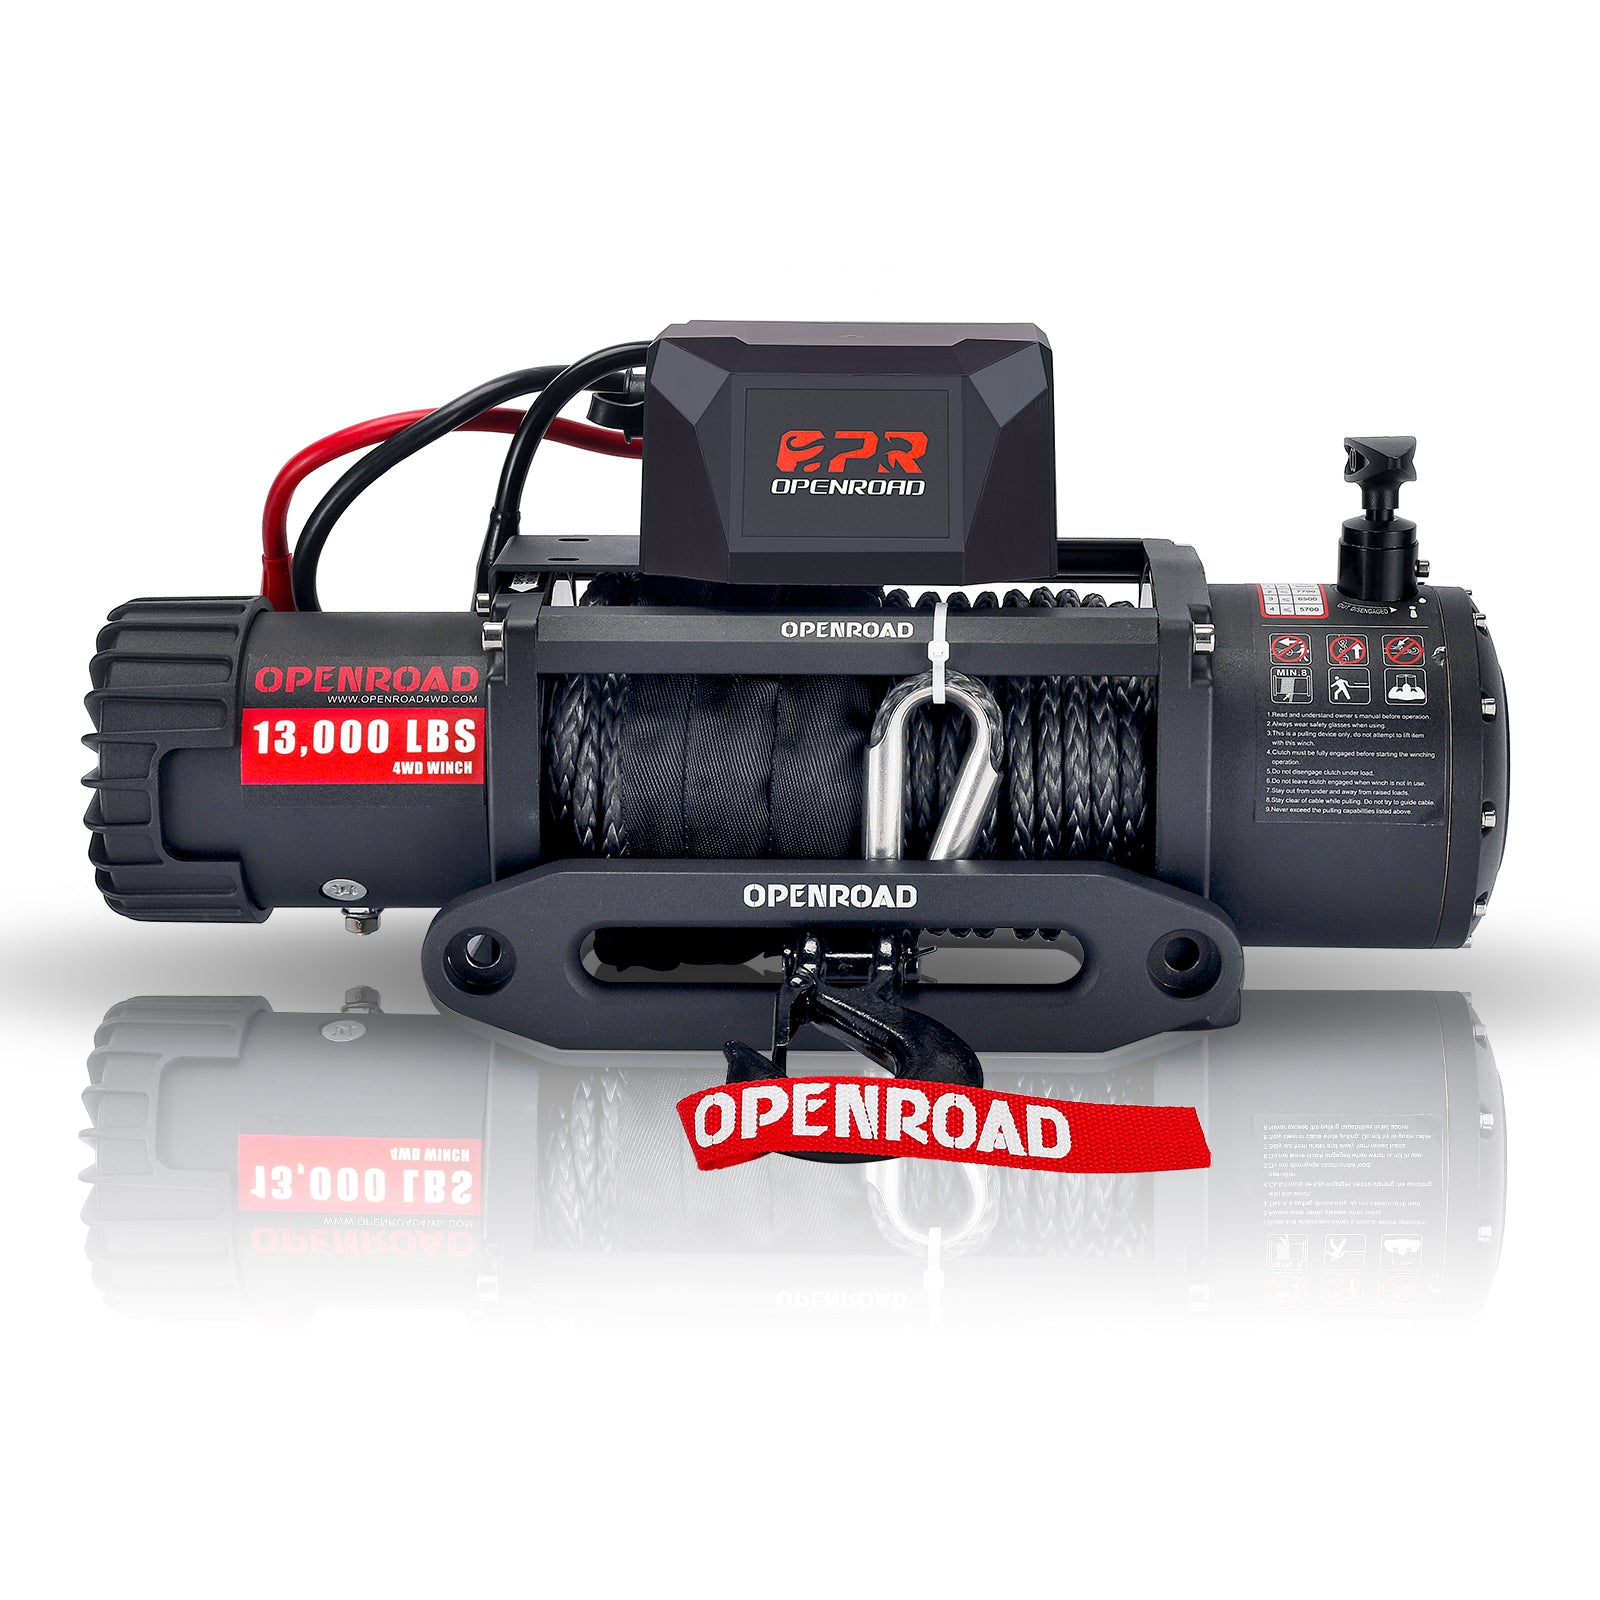 OPENROAD 13,000 lbs winch with synthetic rope and 2 wireless remote controllers - Panther Series 2S, compatible with the front bumper designed for a 12,000 lbs winch winch OPENROAD 13000lbs  